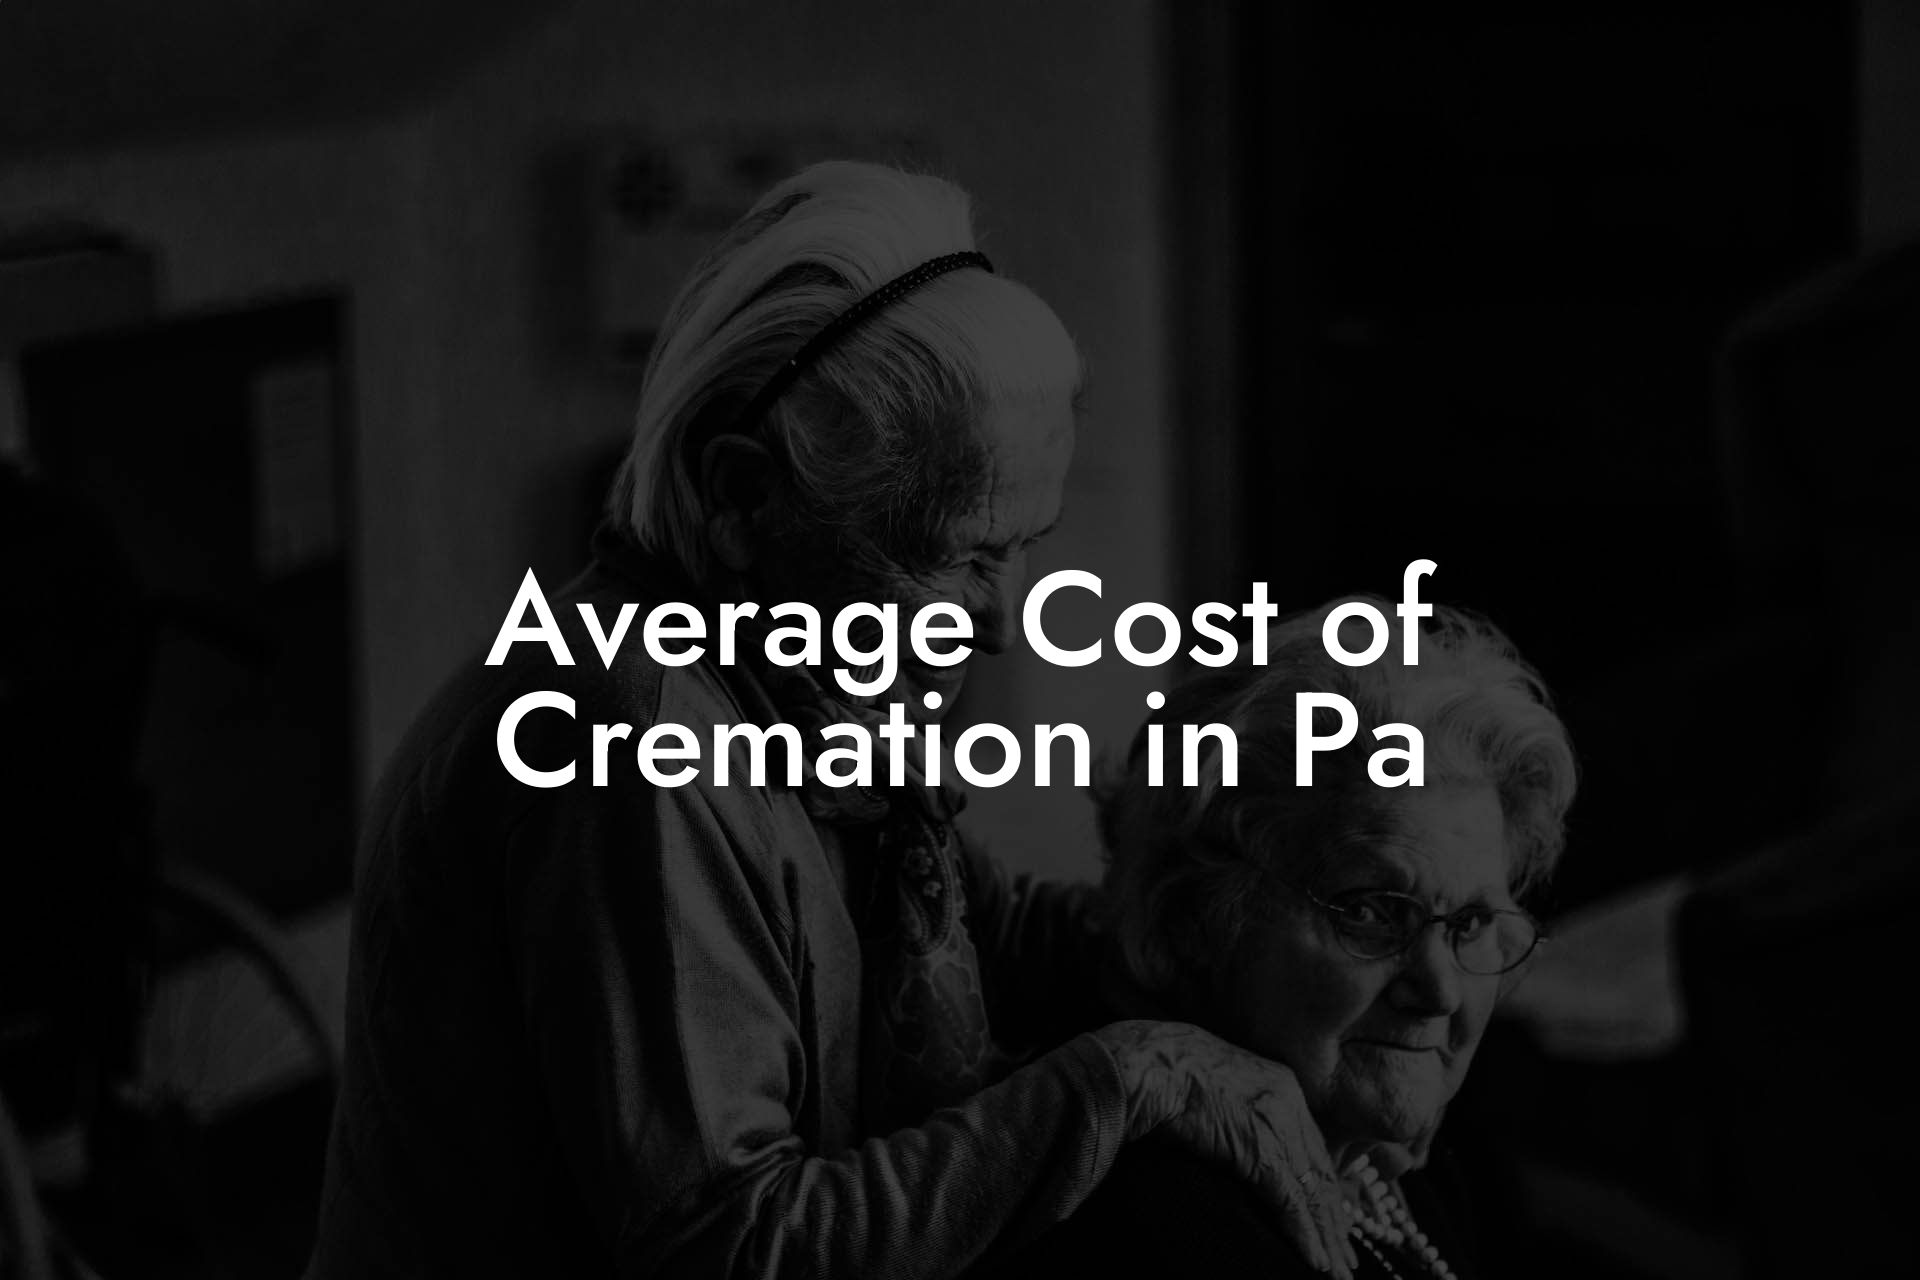 Average Cost of Cremation in Pa